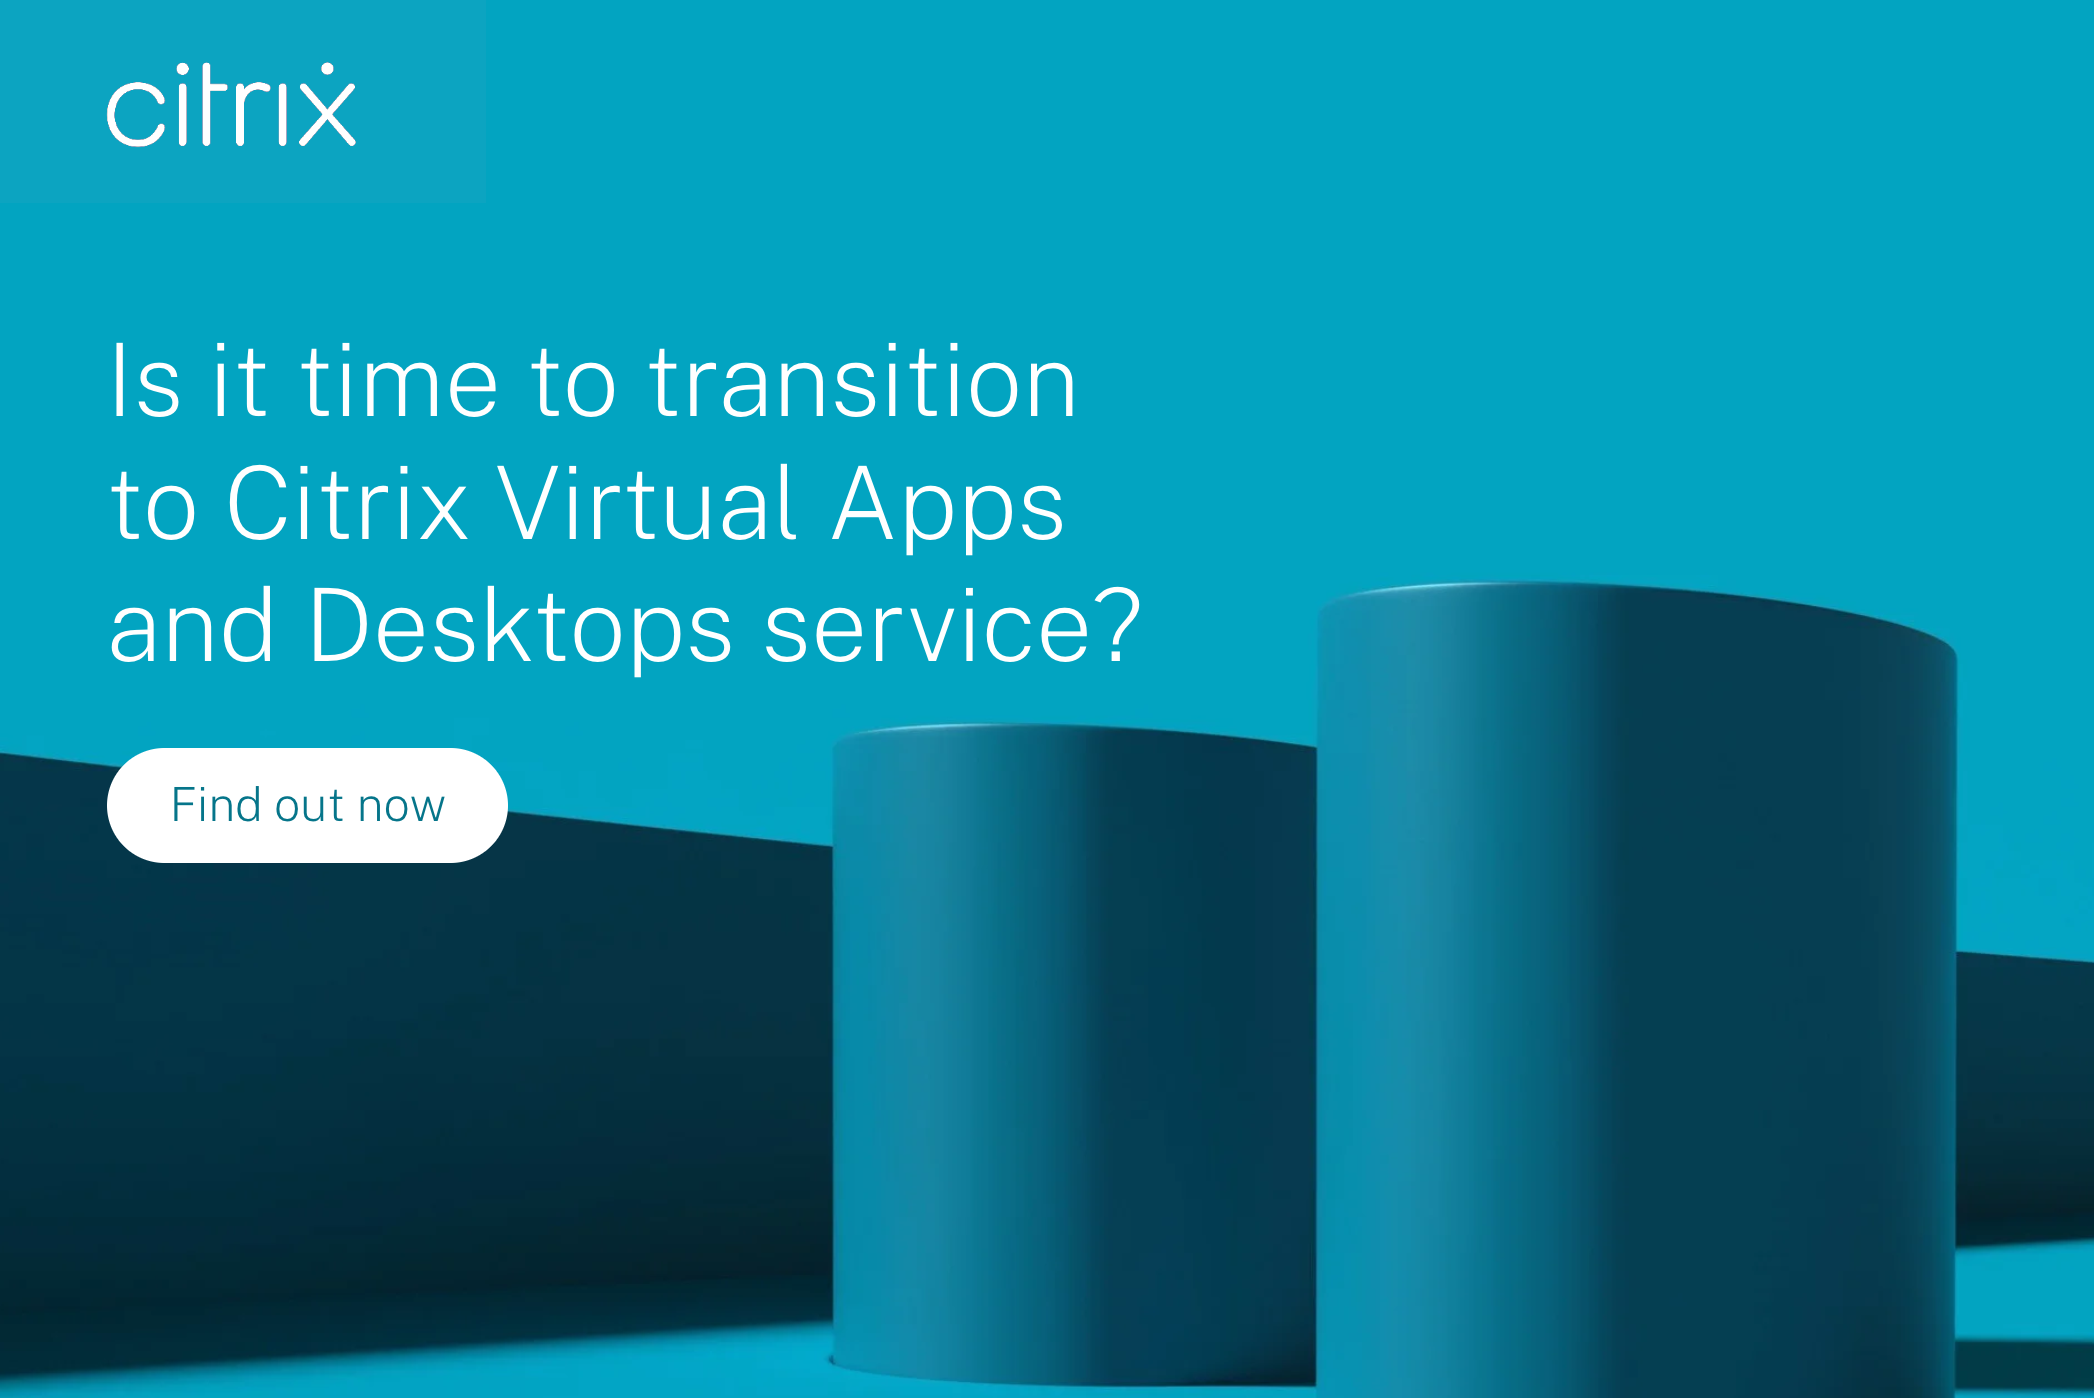 Is it time to transition to Citrix Virtual Apps and Desktops service?